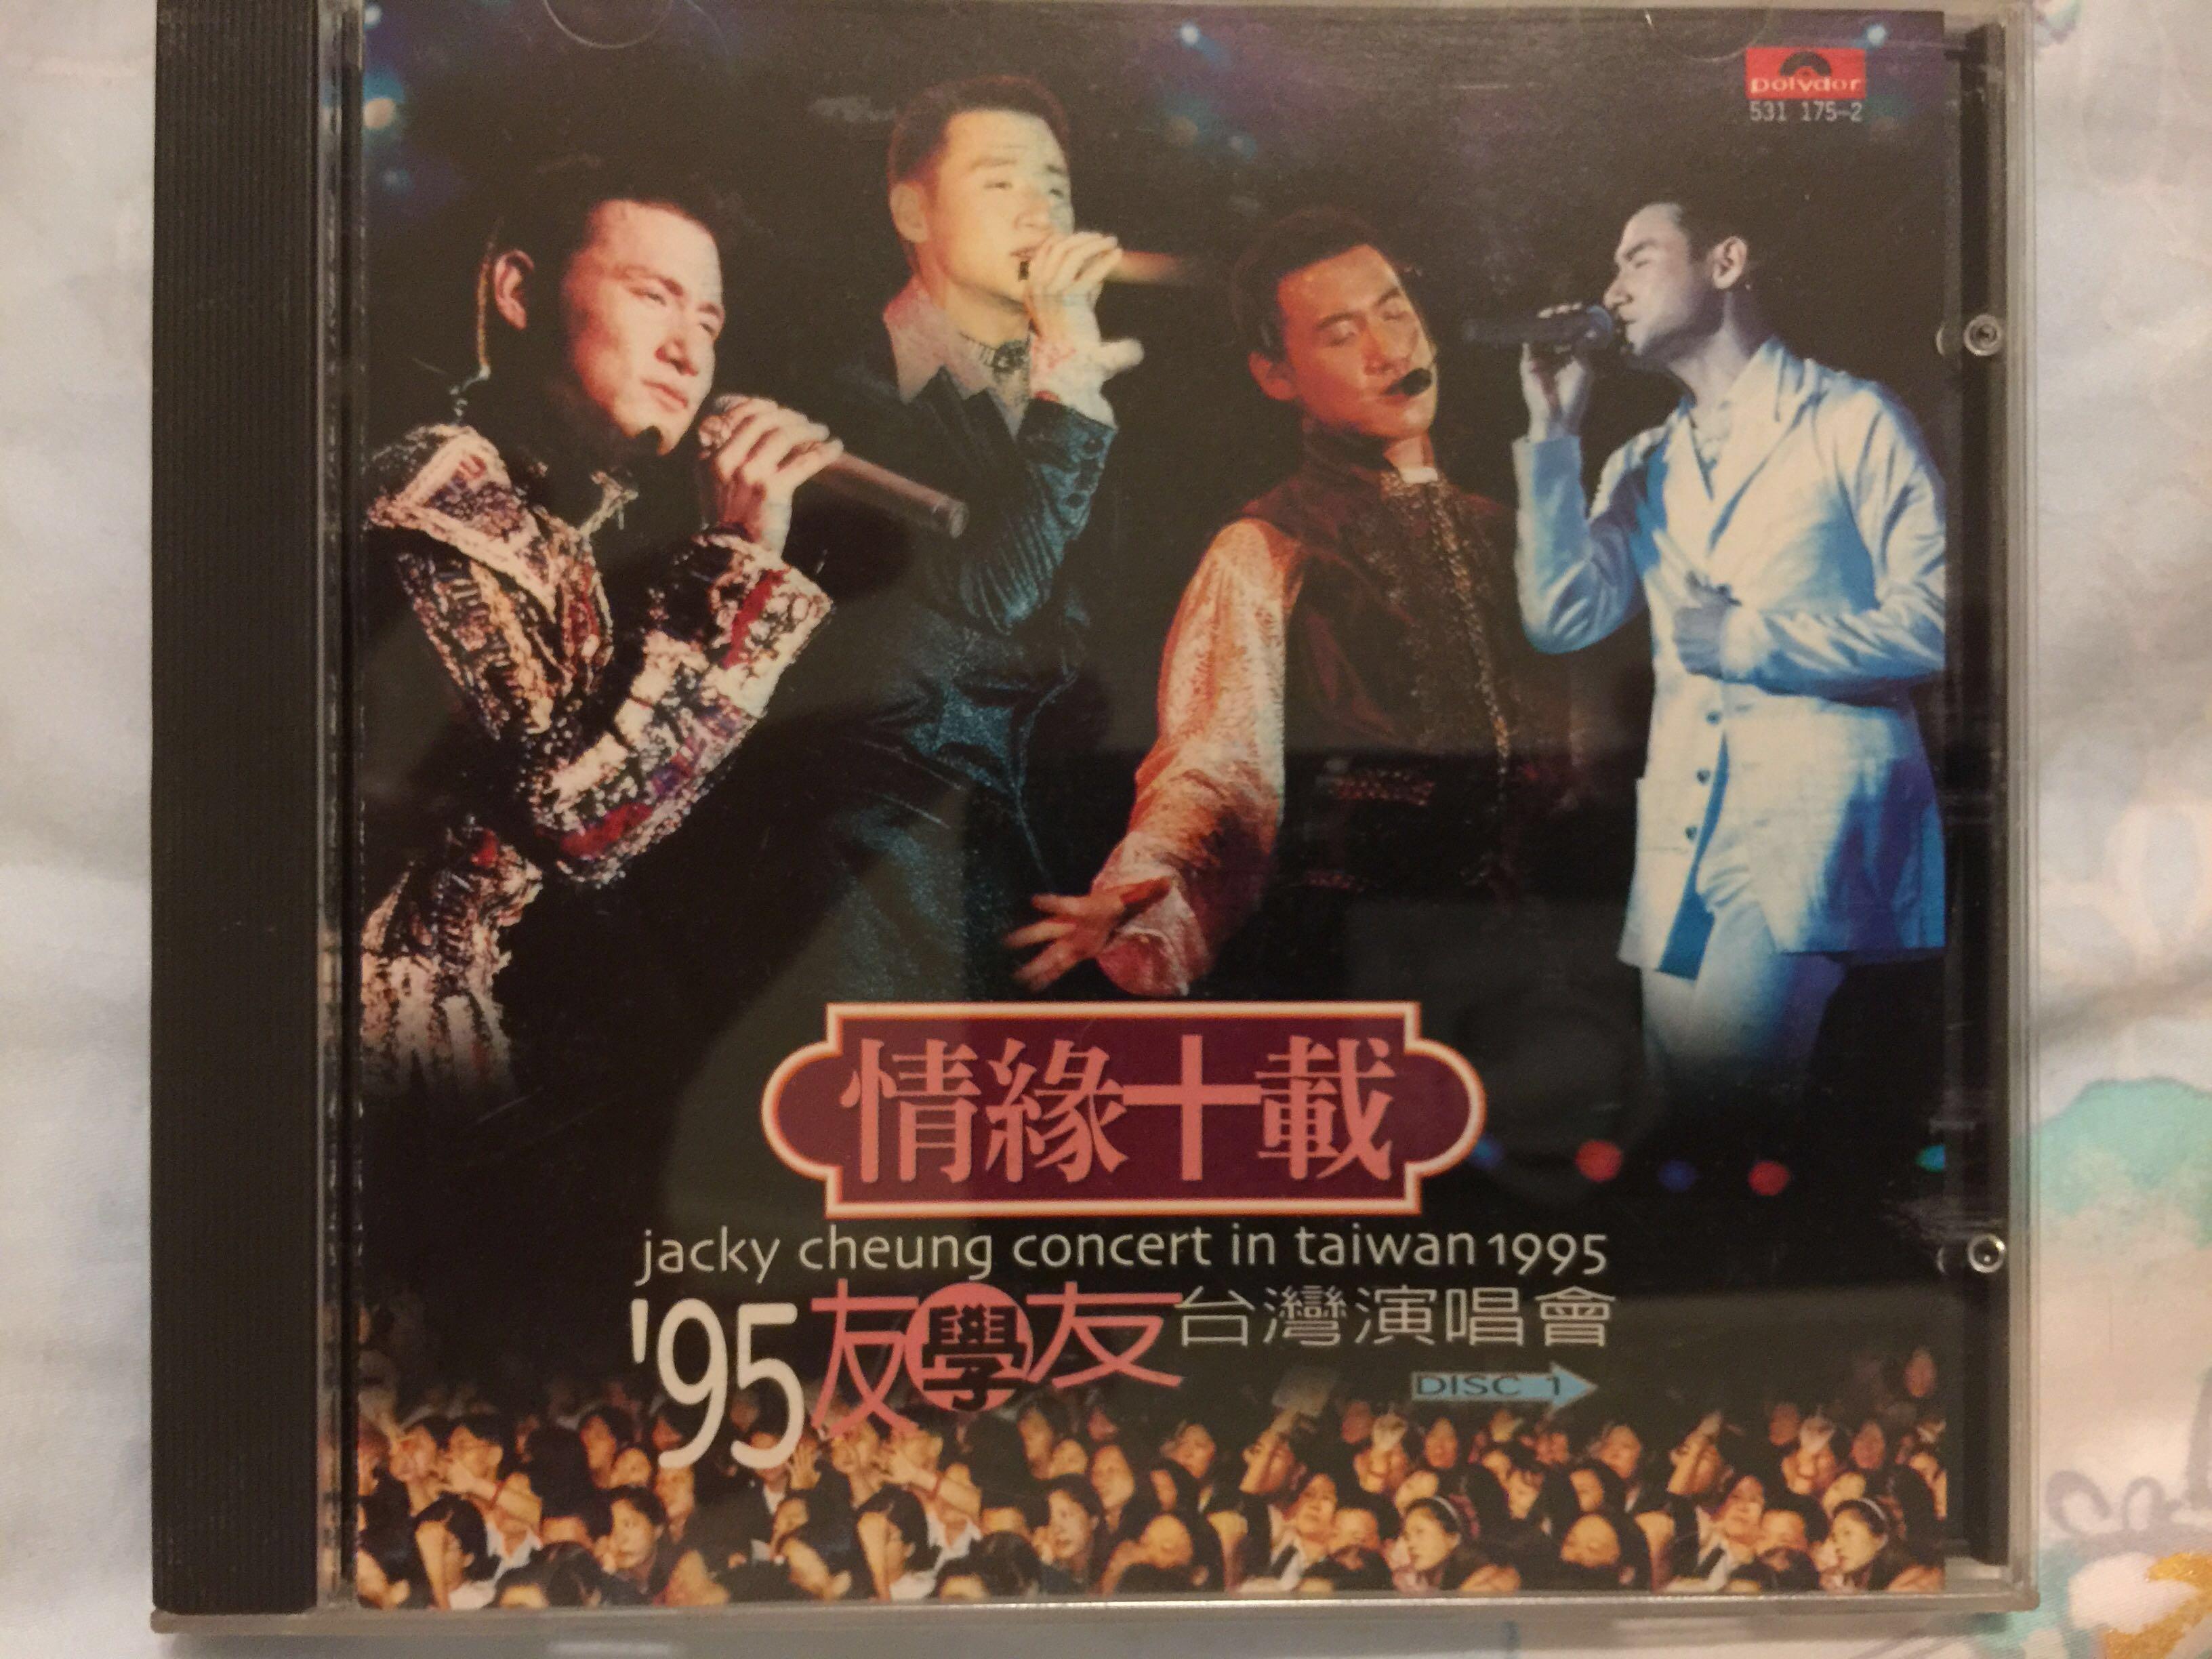 CD：張學友情緣十載'95友學友台灣演唱會Jacky Cheung concert in 